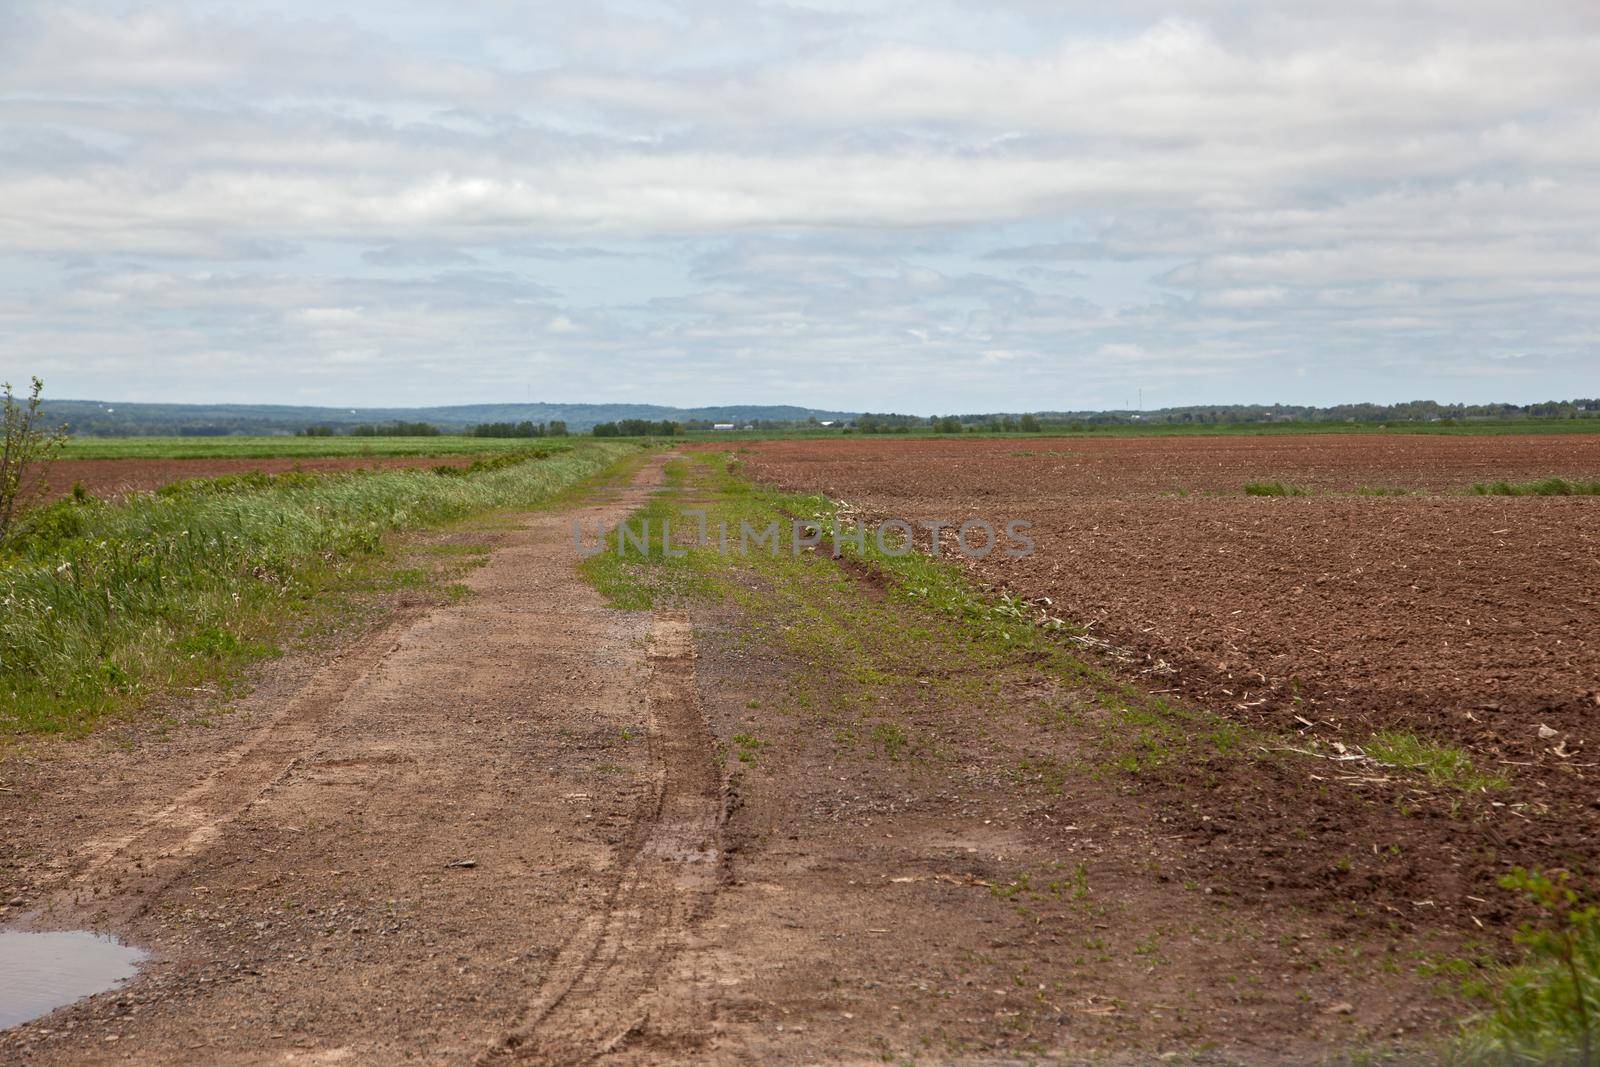  A dirt road leads through agriculture land, fields and crops